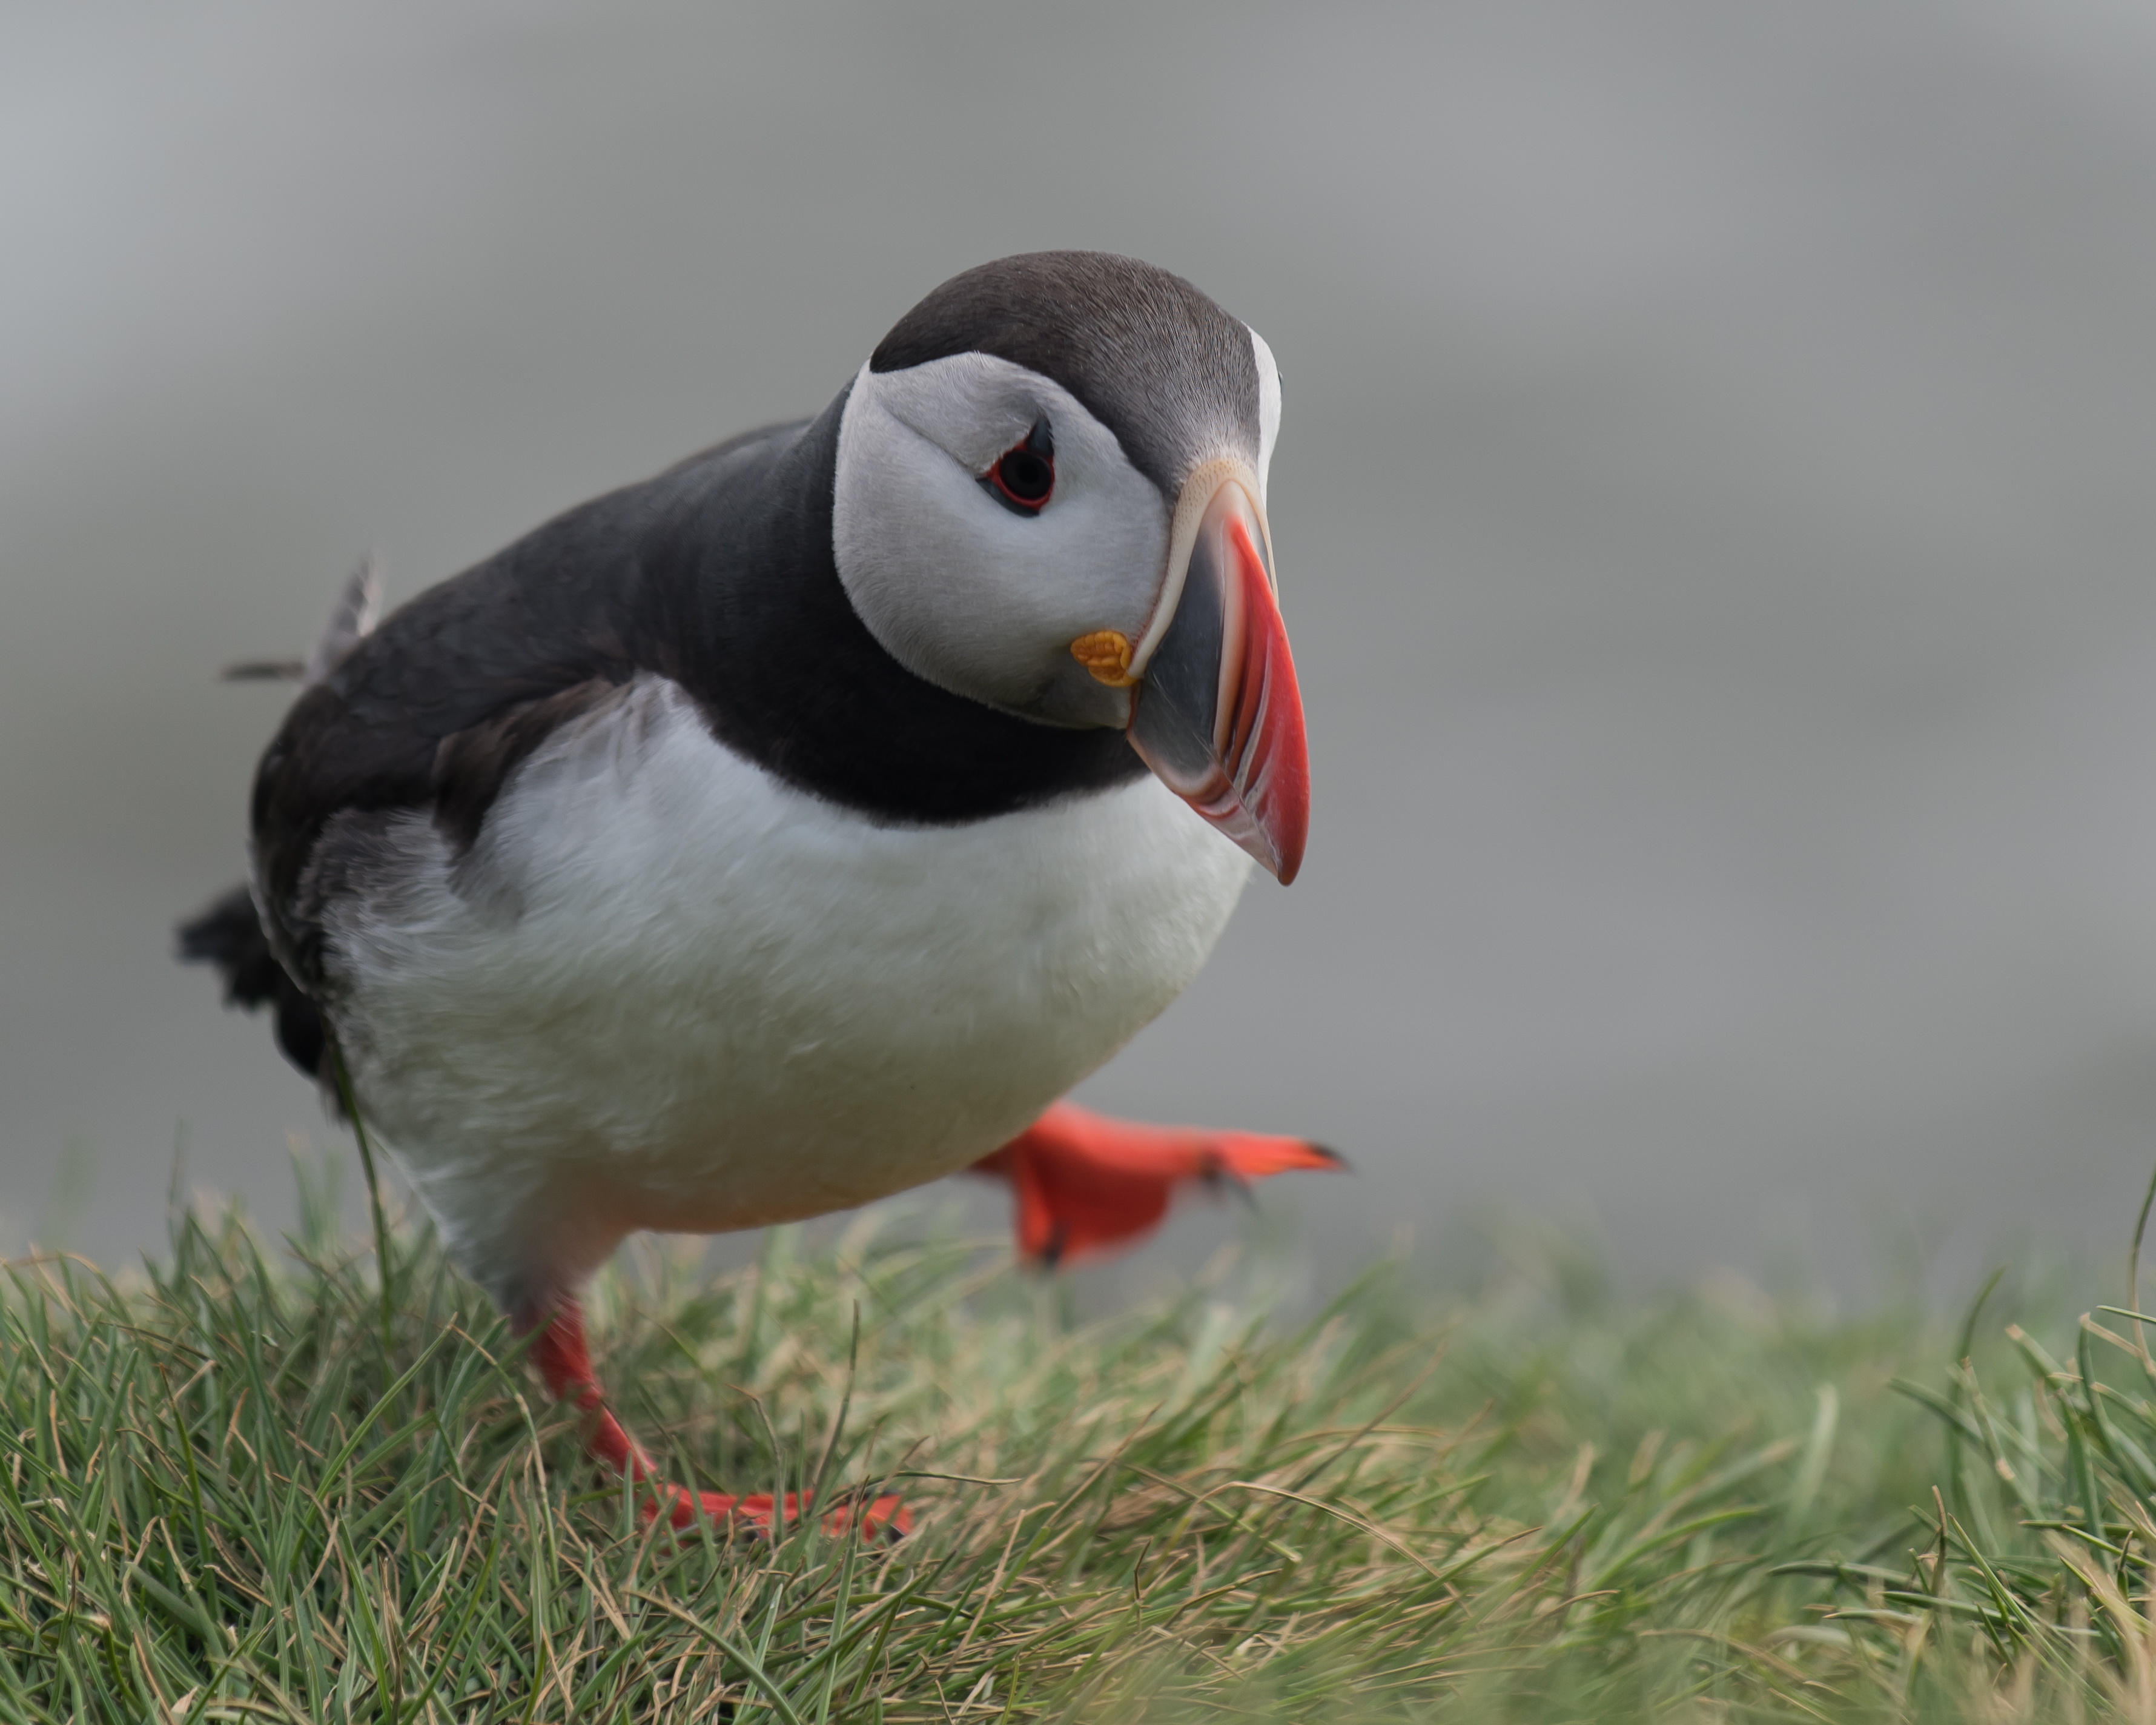 5 things you may not know about the Puffin